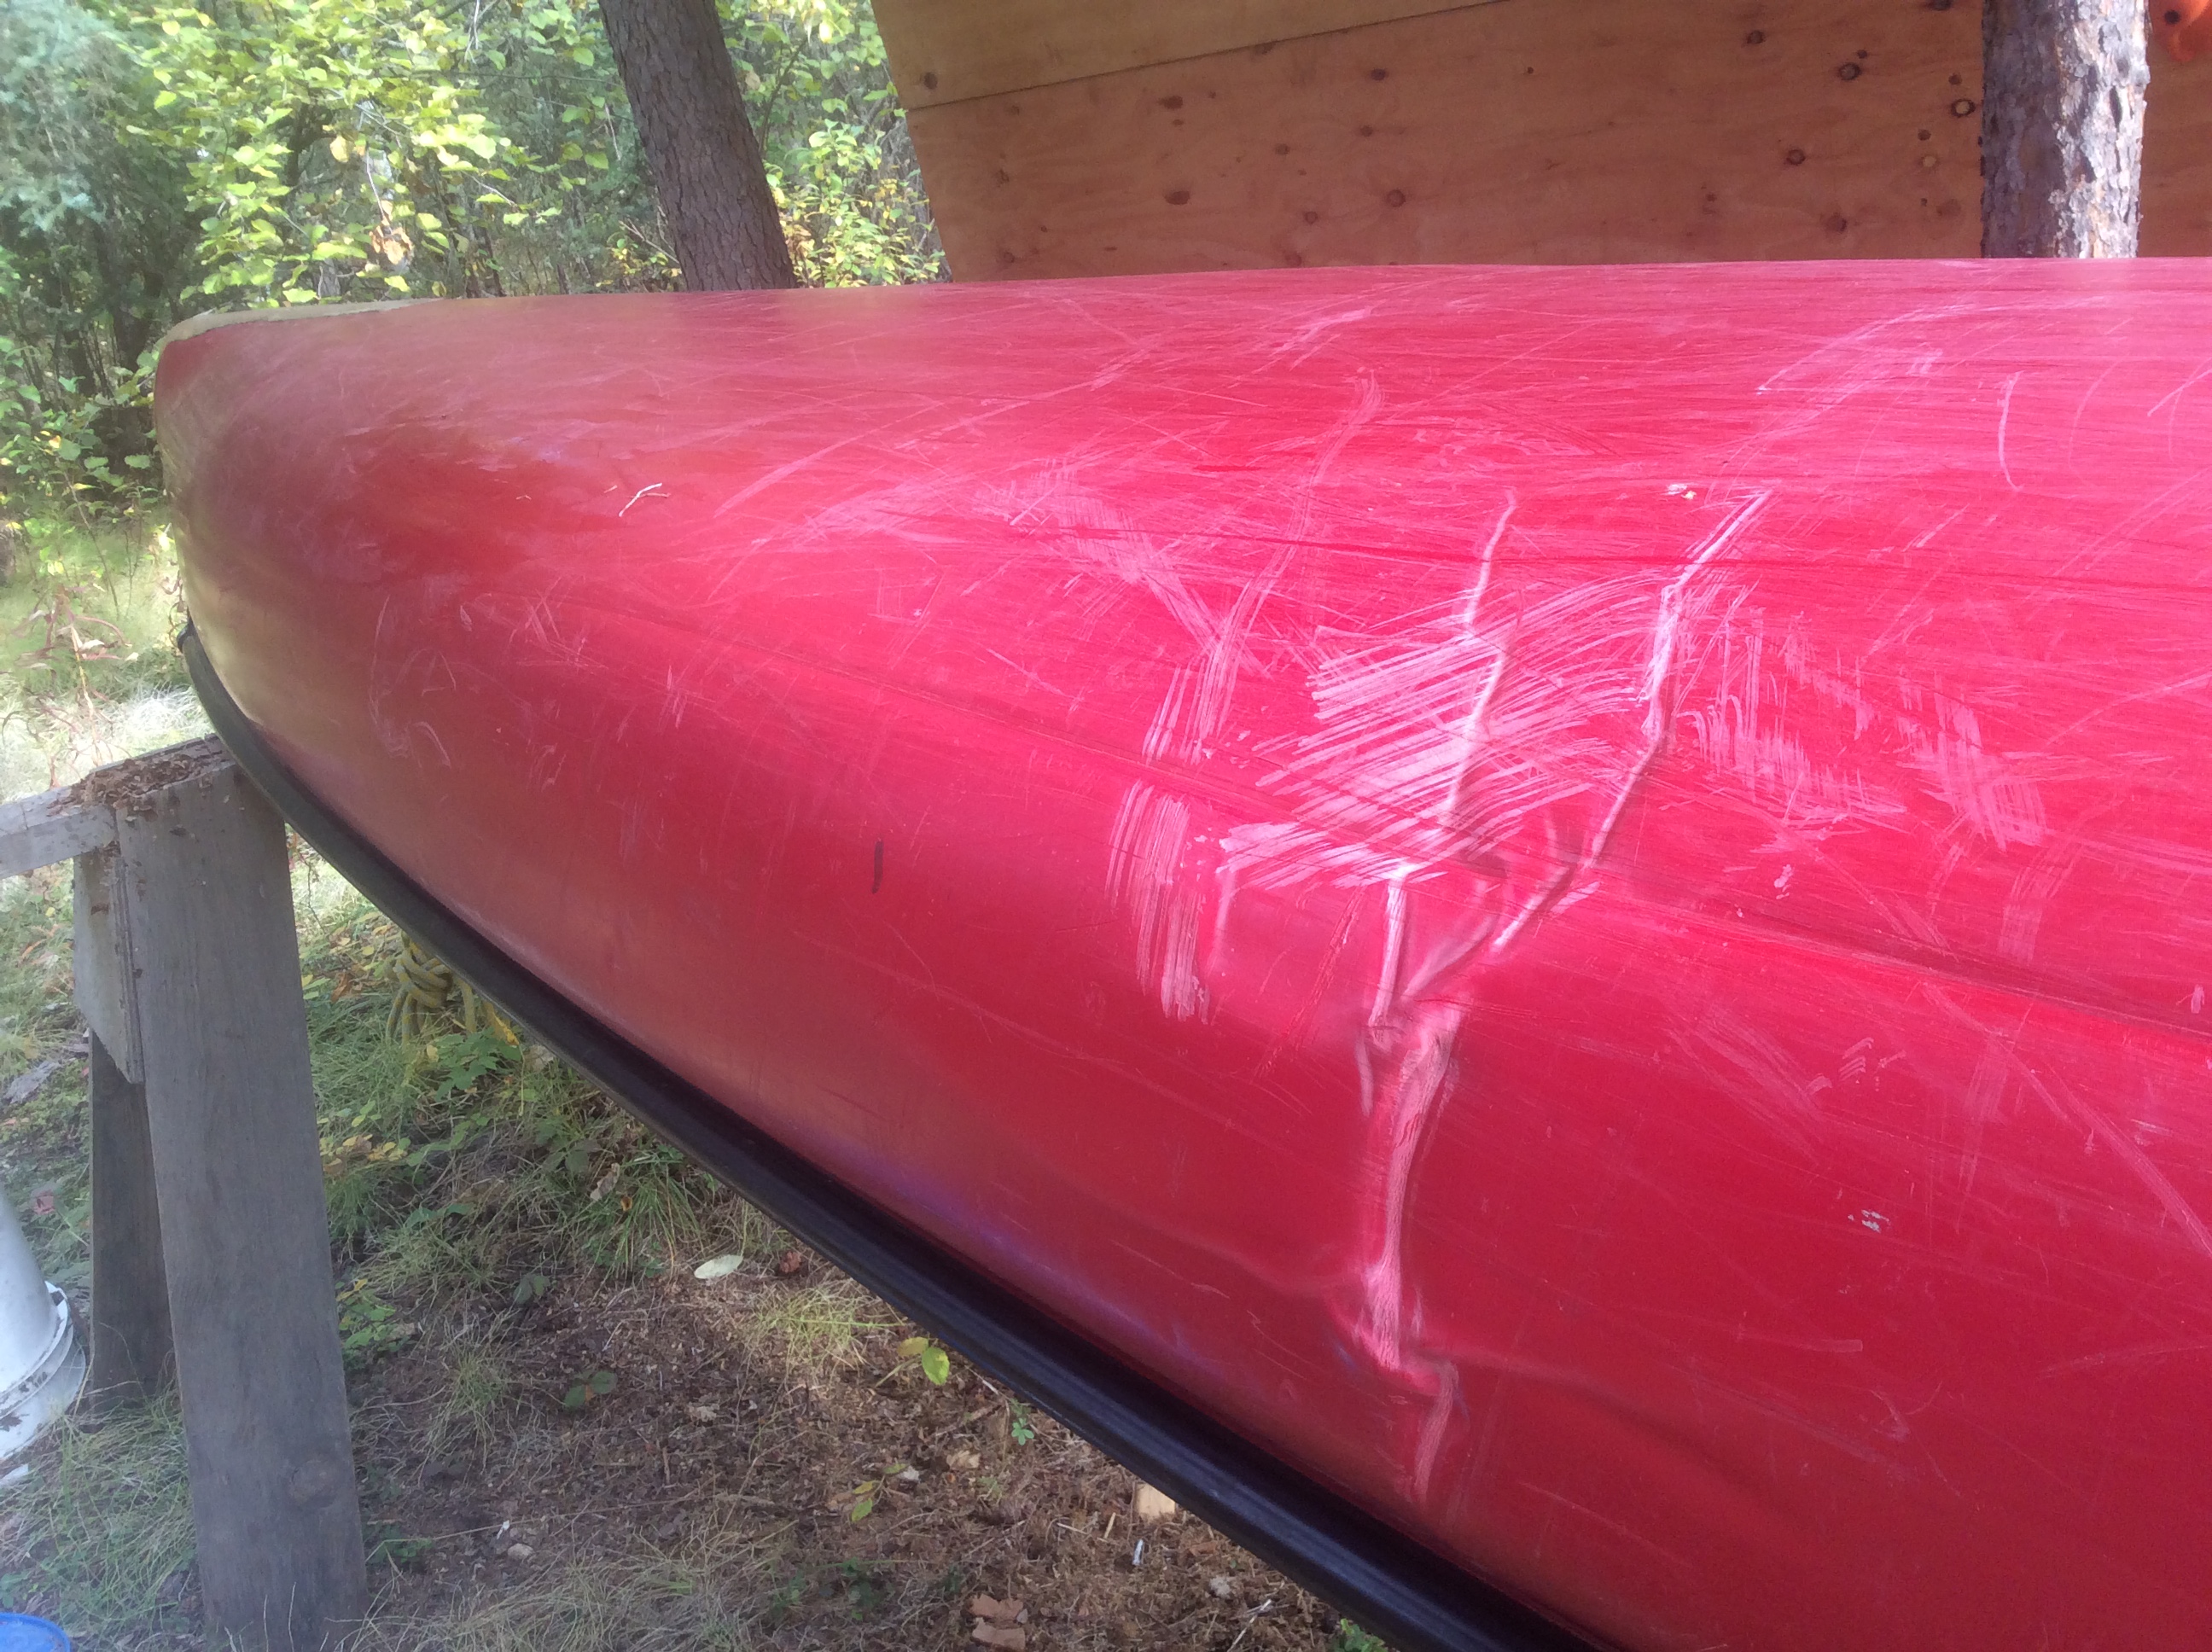 Wrinkles mar the surface of a red plastic canoe's bottom.